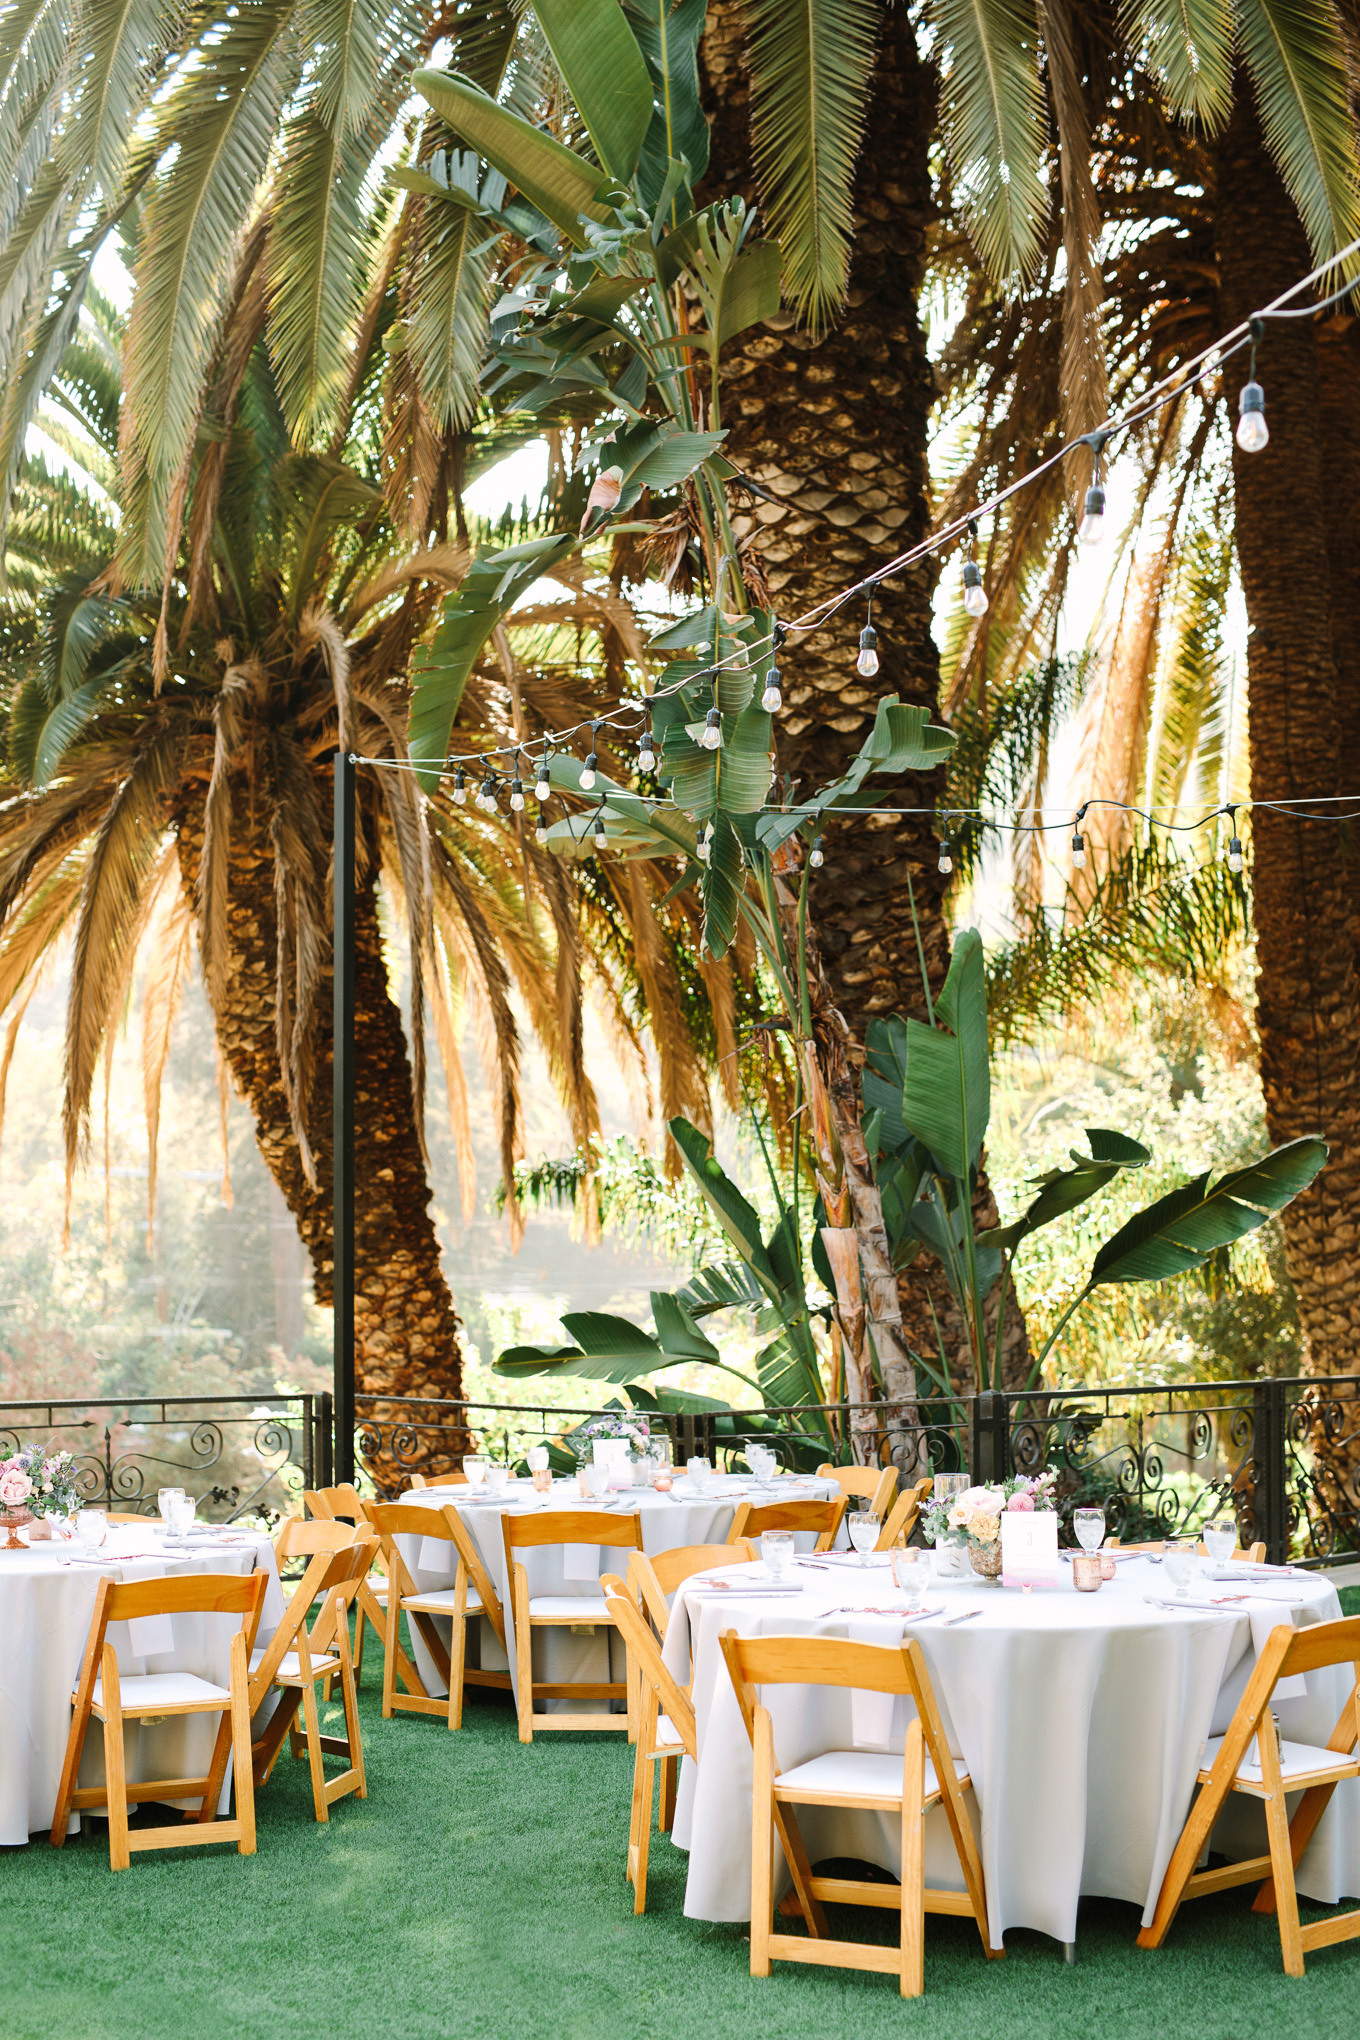 Houdini Estate wedding reception | Best Southern California Garden Wedding Venues | Colorful and elevated wedding photography for fun-loving couples | #gardenvenue #weddingvenue #socalweddingvenue #bouquetideas #uniquebouquet   Source: Mary Costa Photography | Los Angeles 